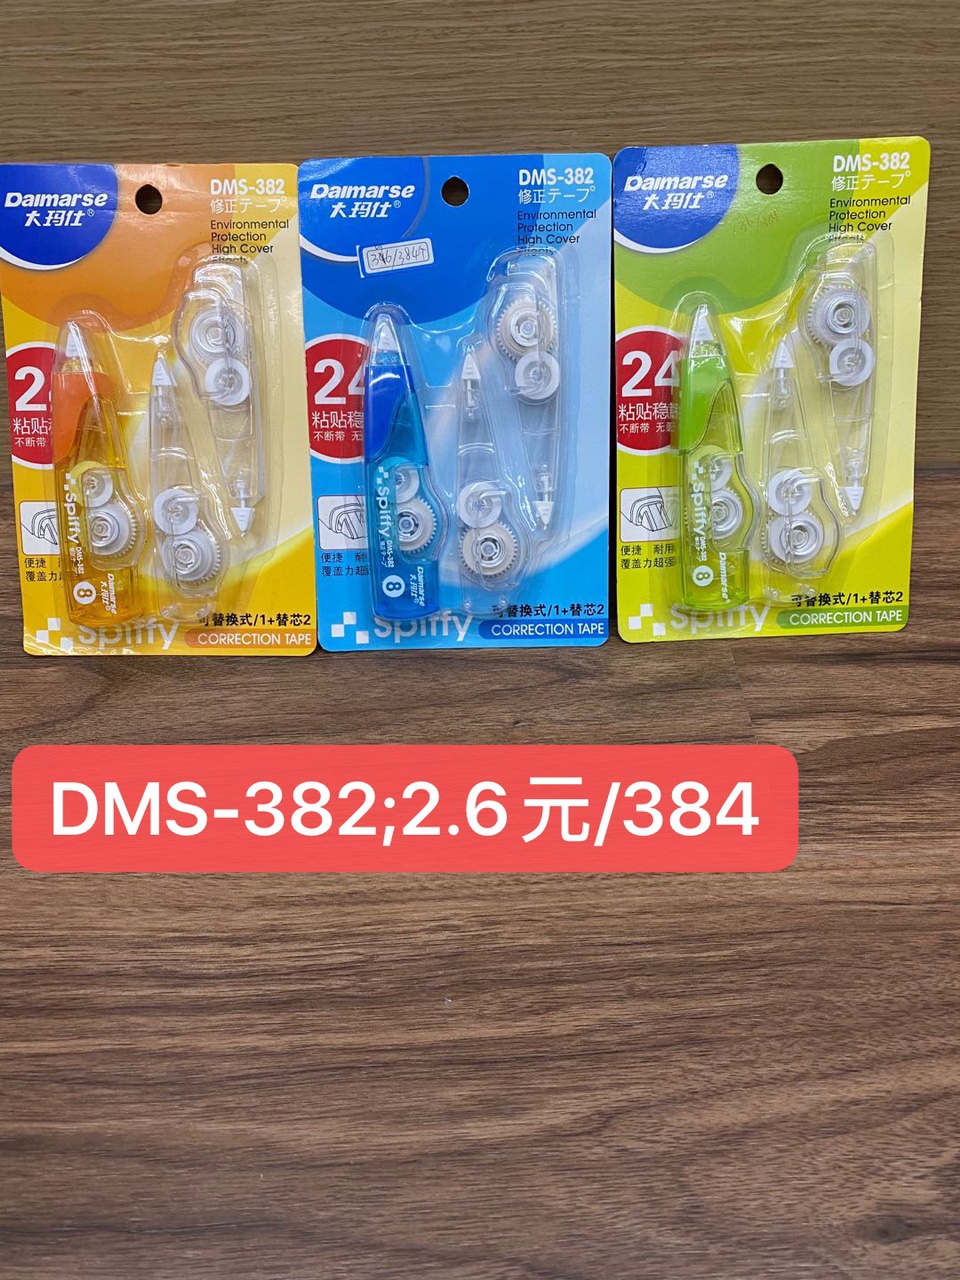 dms-382 learning stationery correction tape correction tape large capacity factory direct sales stationery school supplies